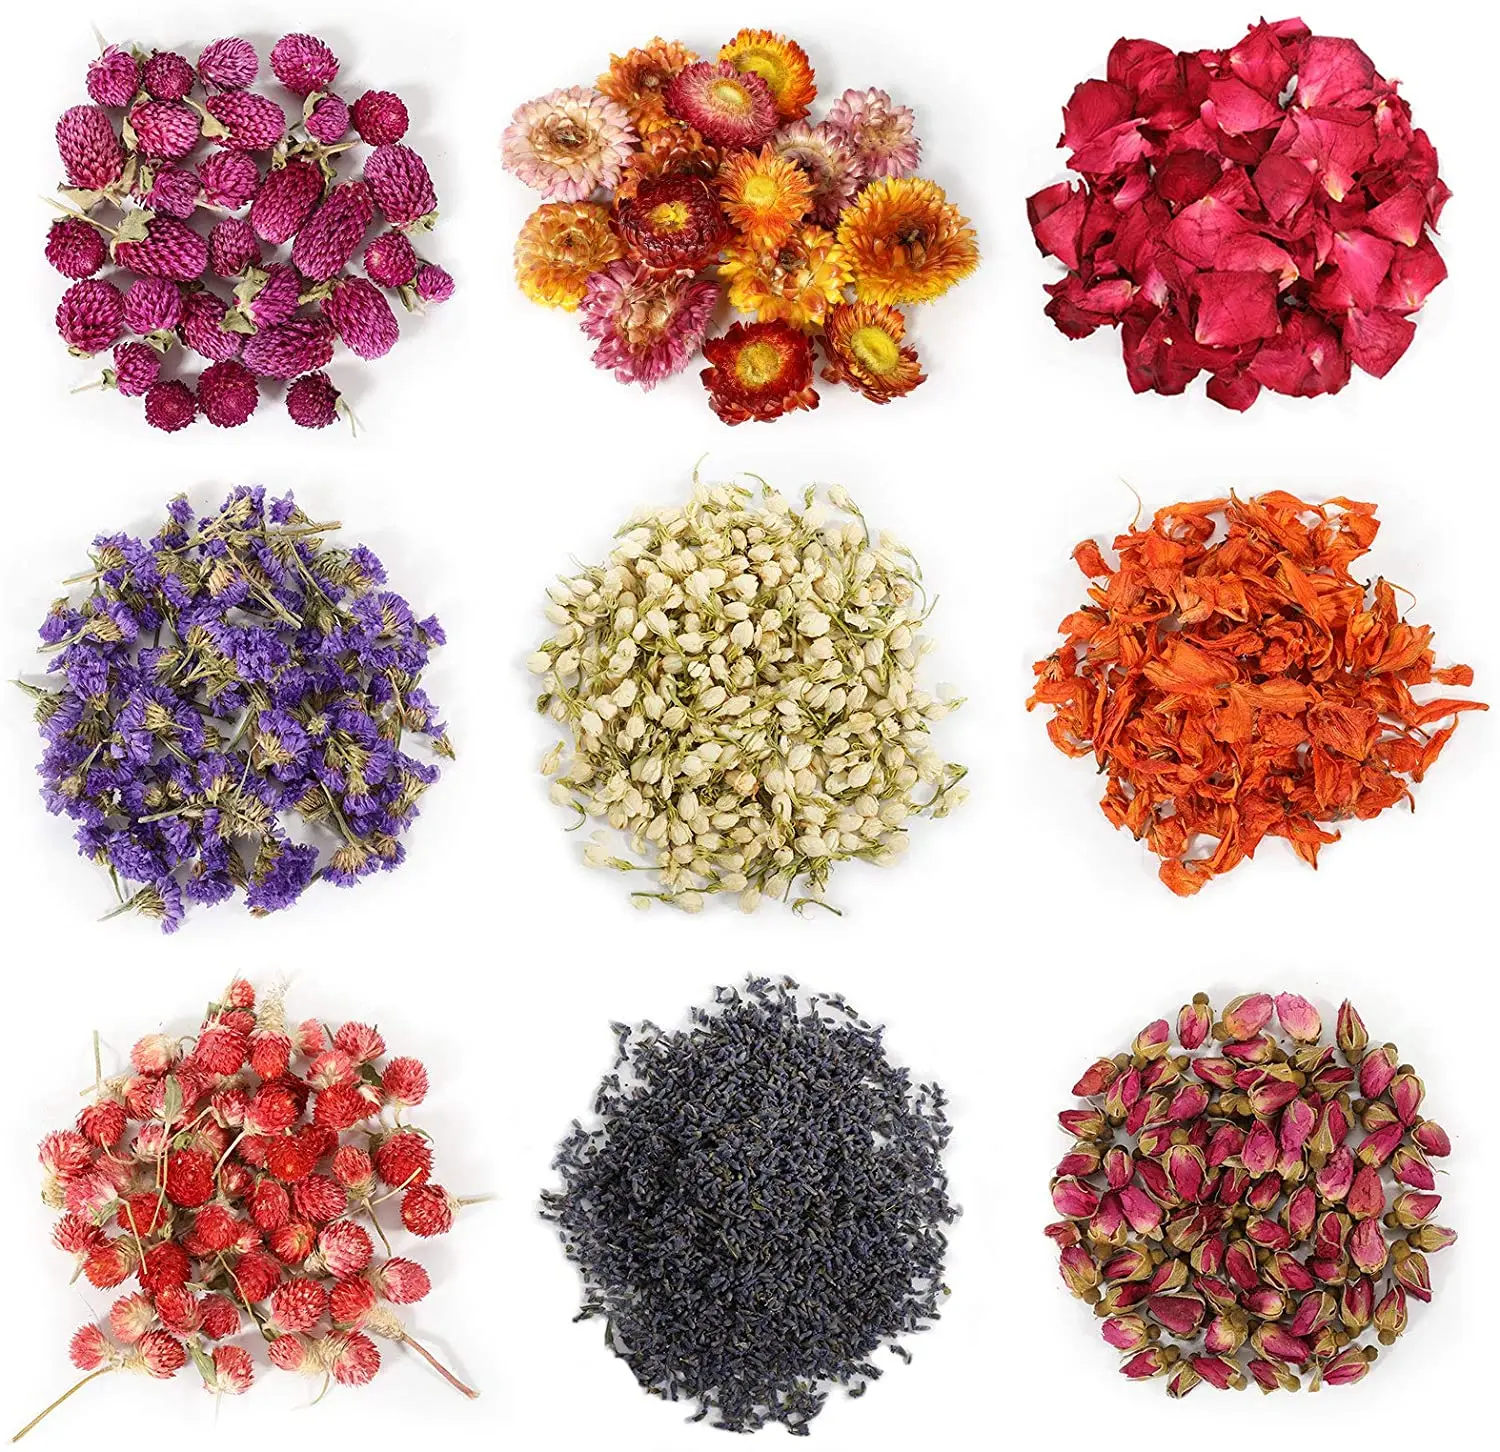 9 Bags Rose, Lavender, Jasmine Dried Flowers,  Natural Herbs Kit for DIY Candle, Bath,Soap ,Resin Jewelry Making,Wedding Decor